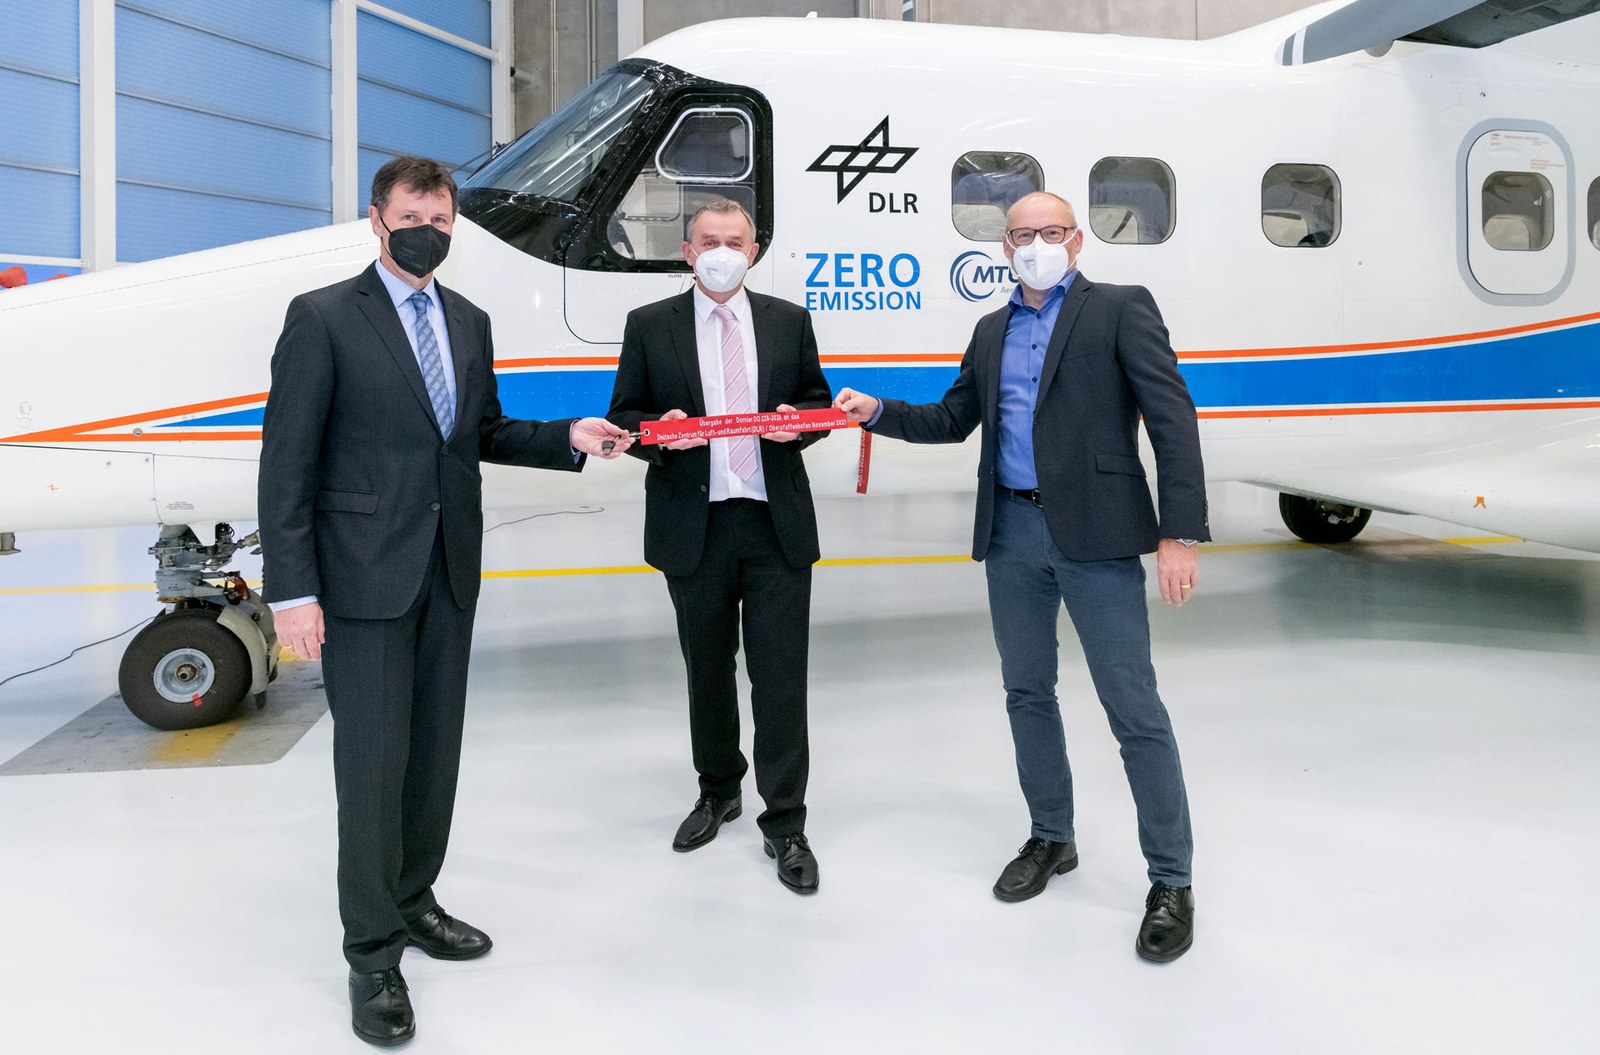 The project partners MTU Aero Engines and DLR